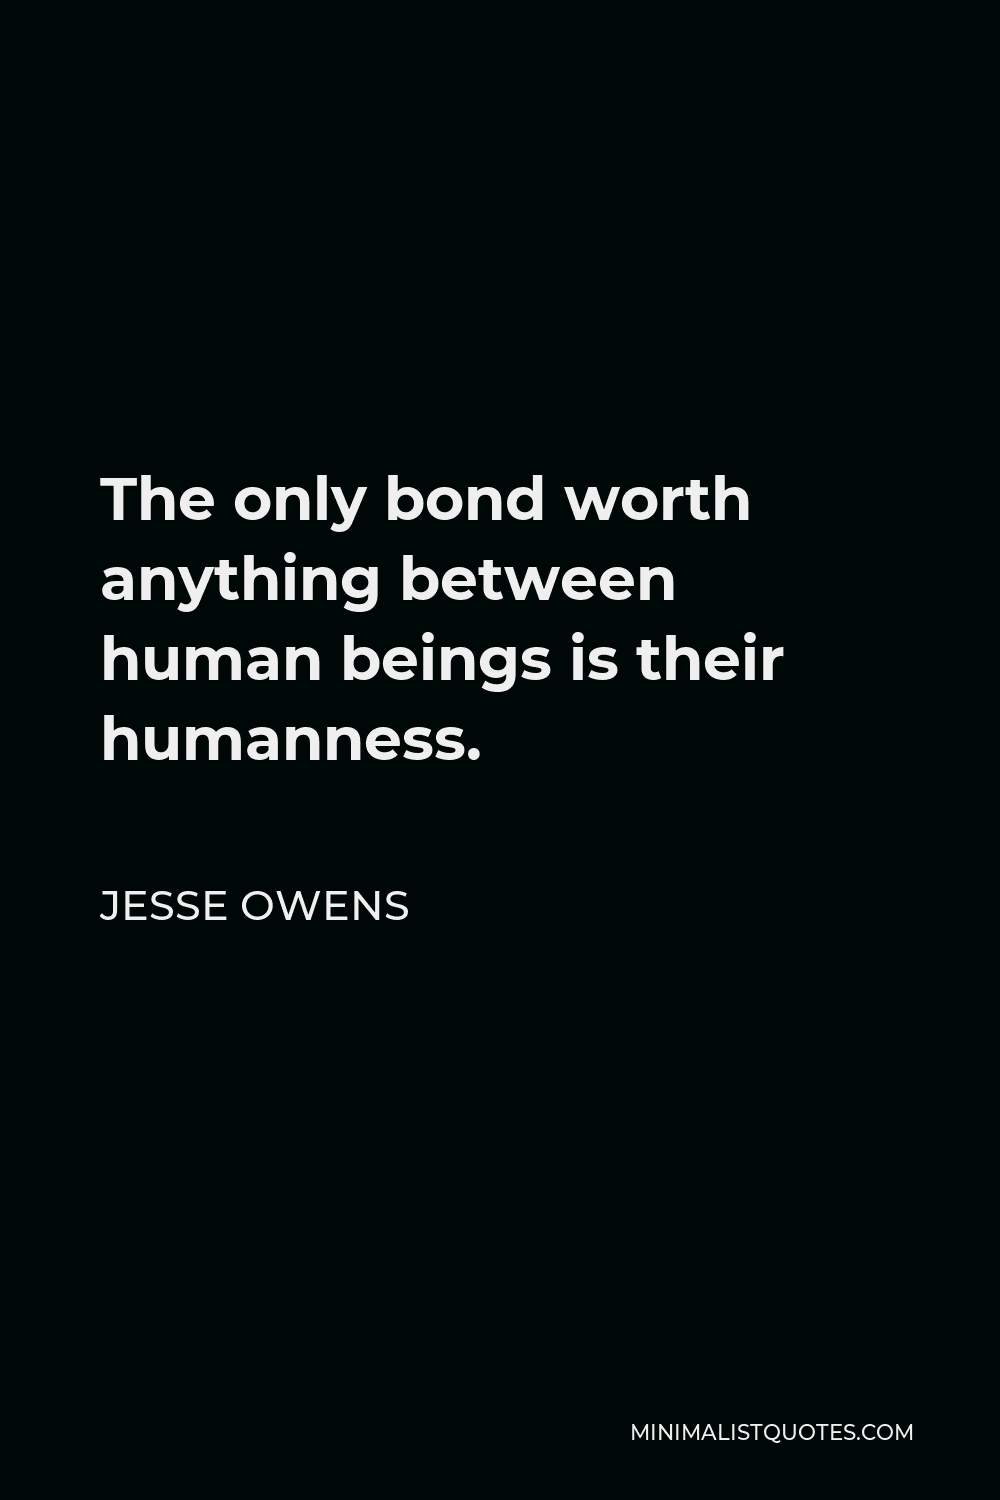 Jesse Owens Quote - The only bond worth anything between human beings is their humanness.